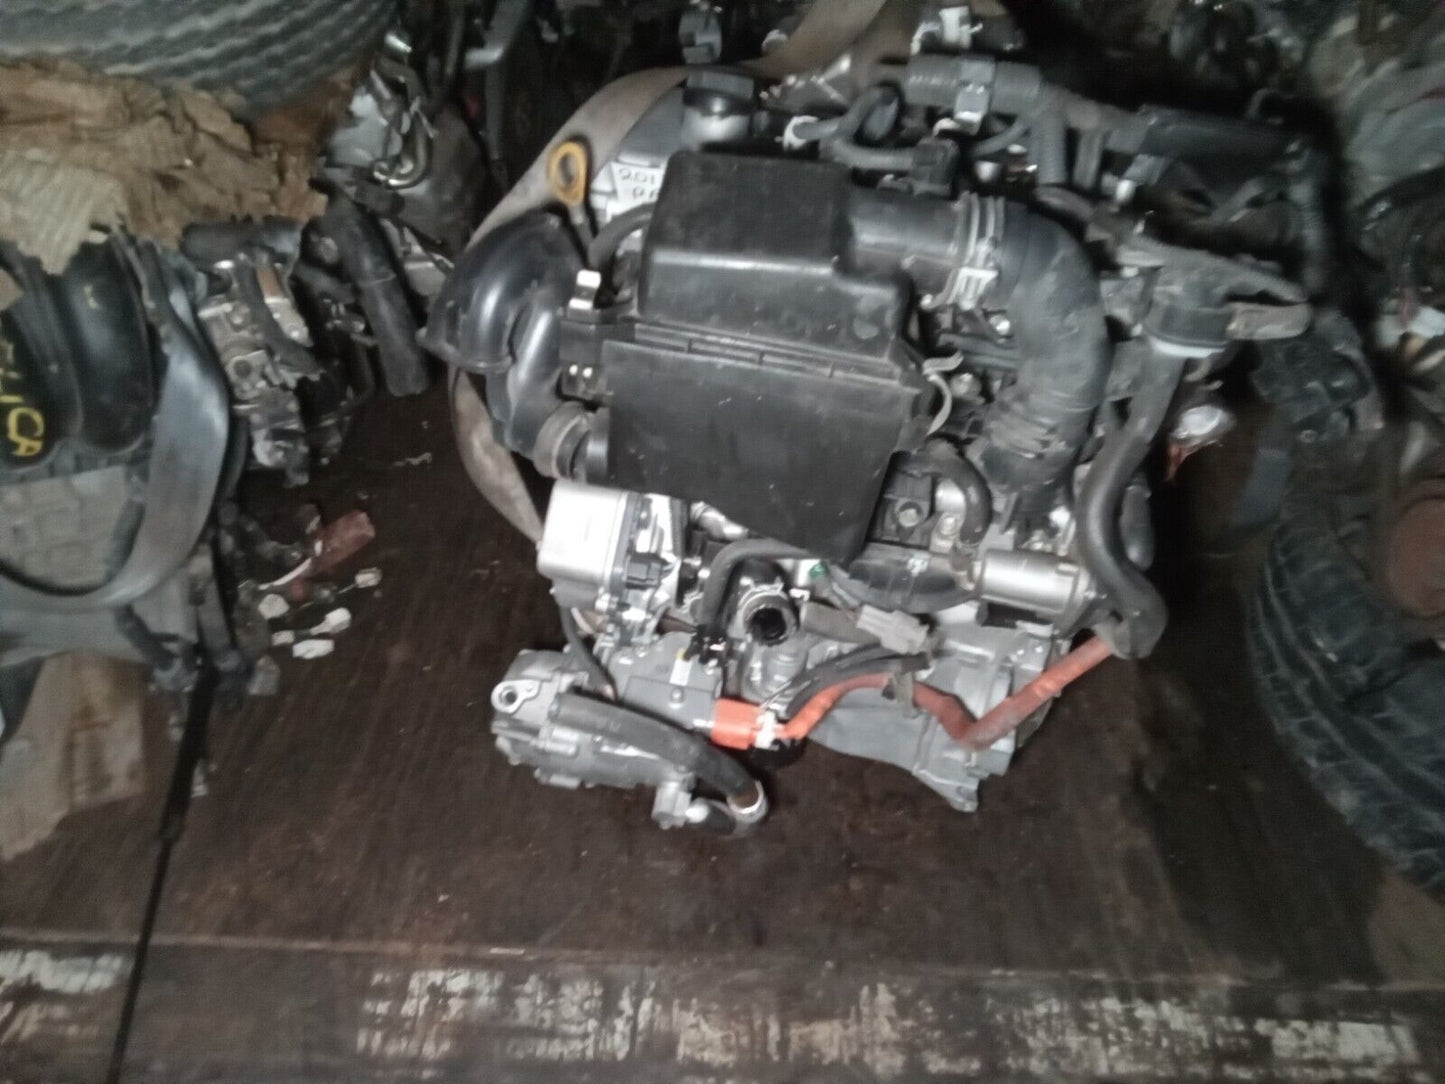 12 13 14 15 16 17 18 19 TOYOTA PRIUS C 1.5L ENGINE MOTOR ASSEMBLY 1NZFXE VIN B3